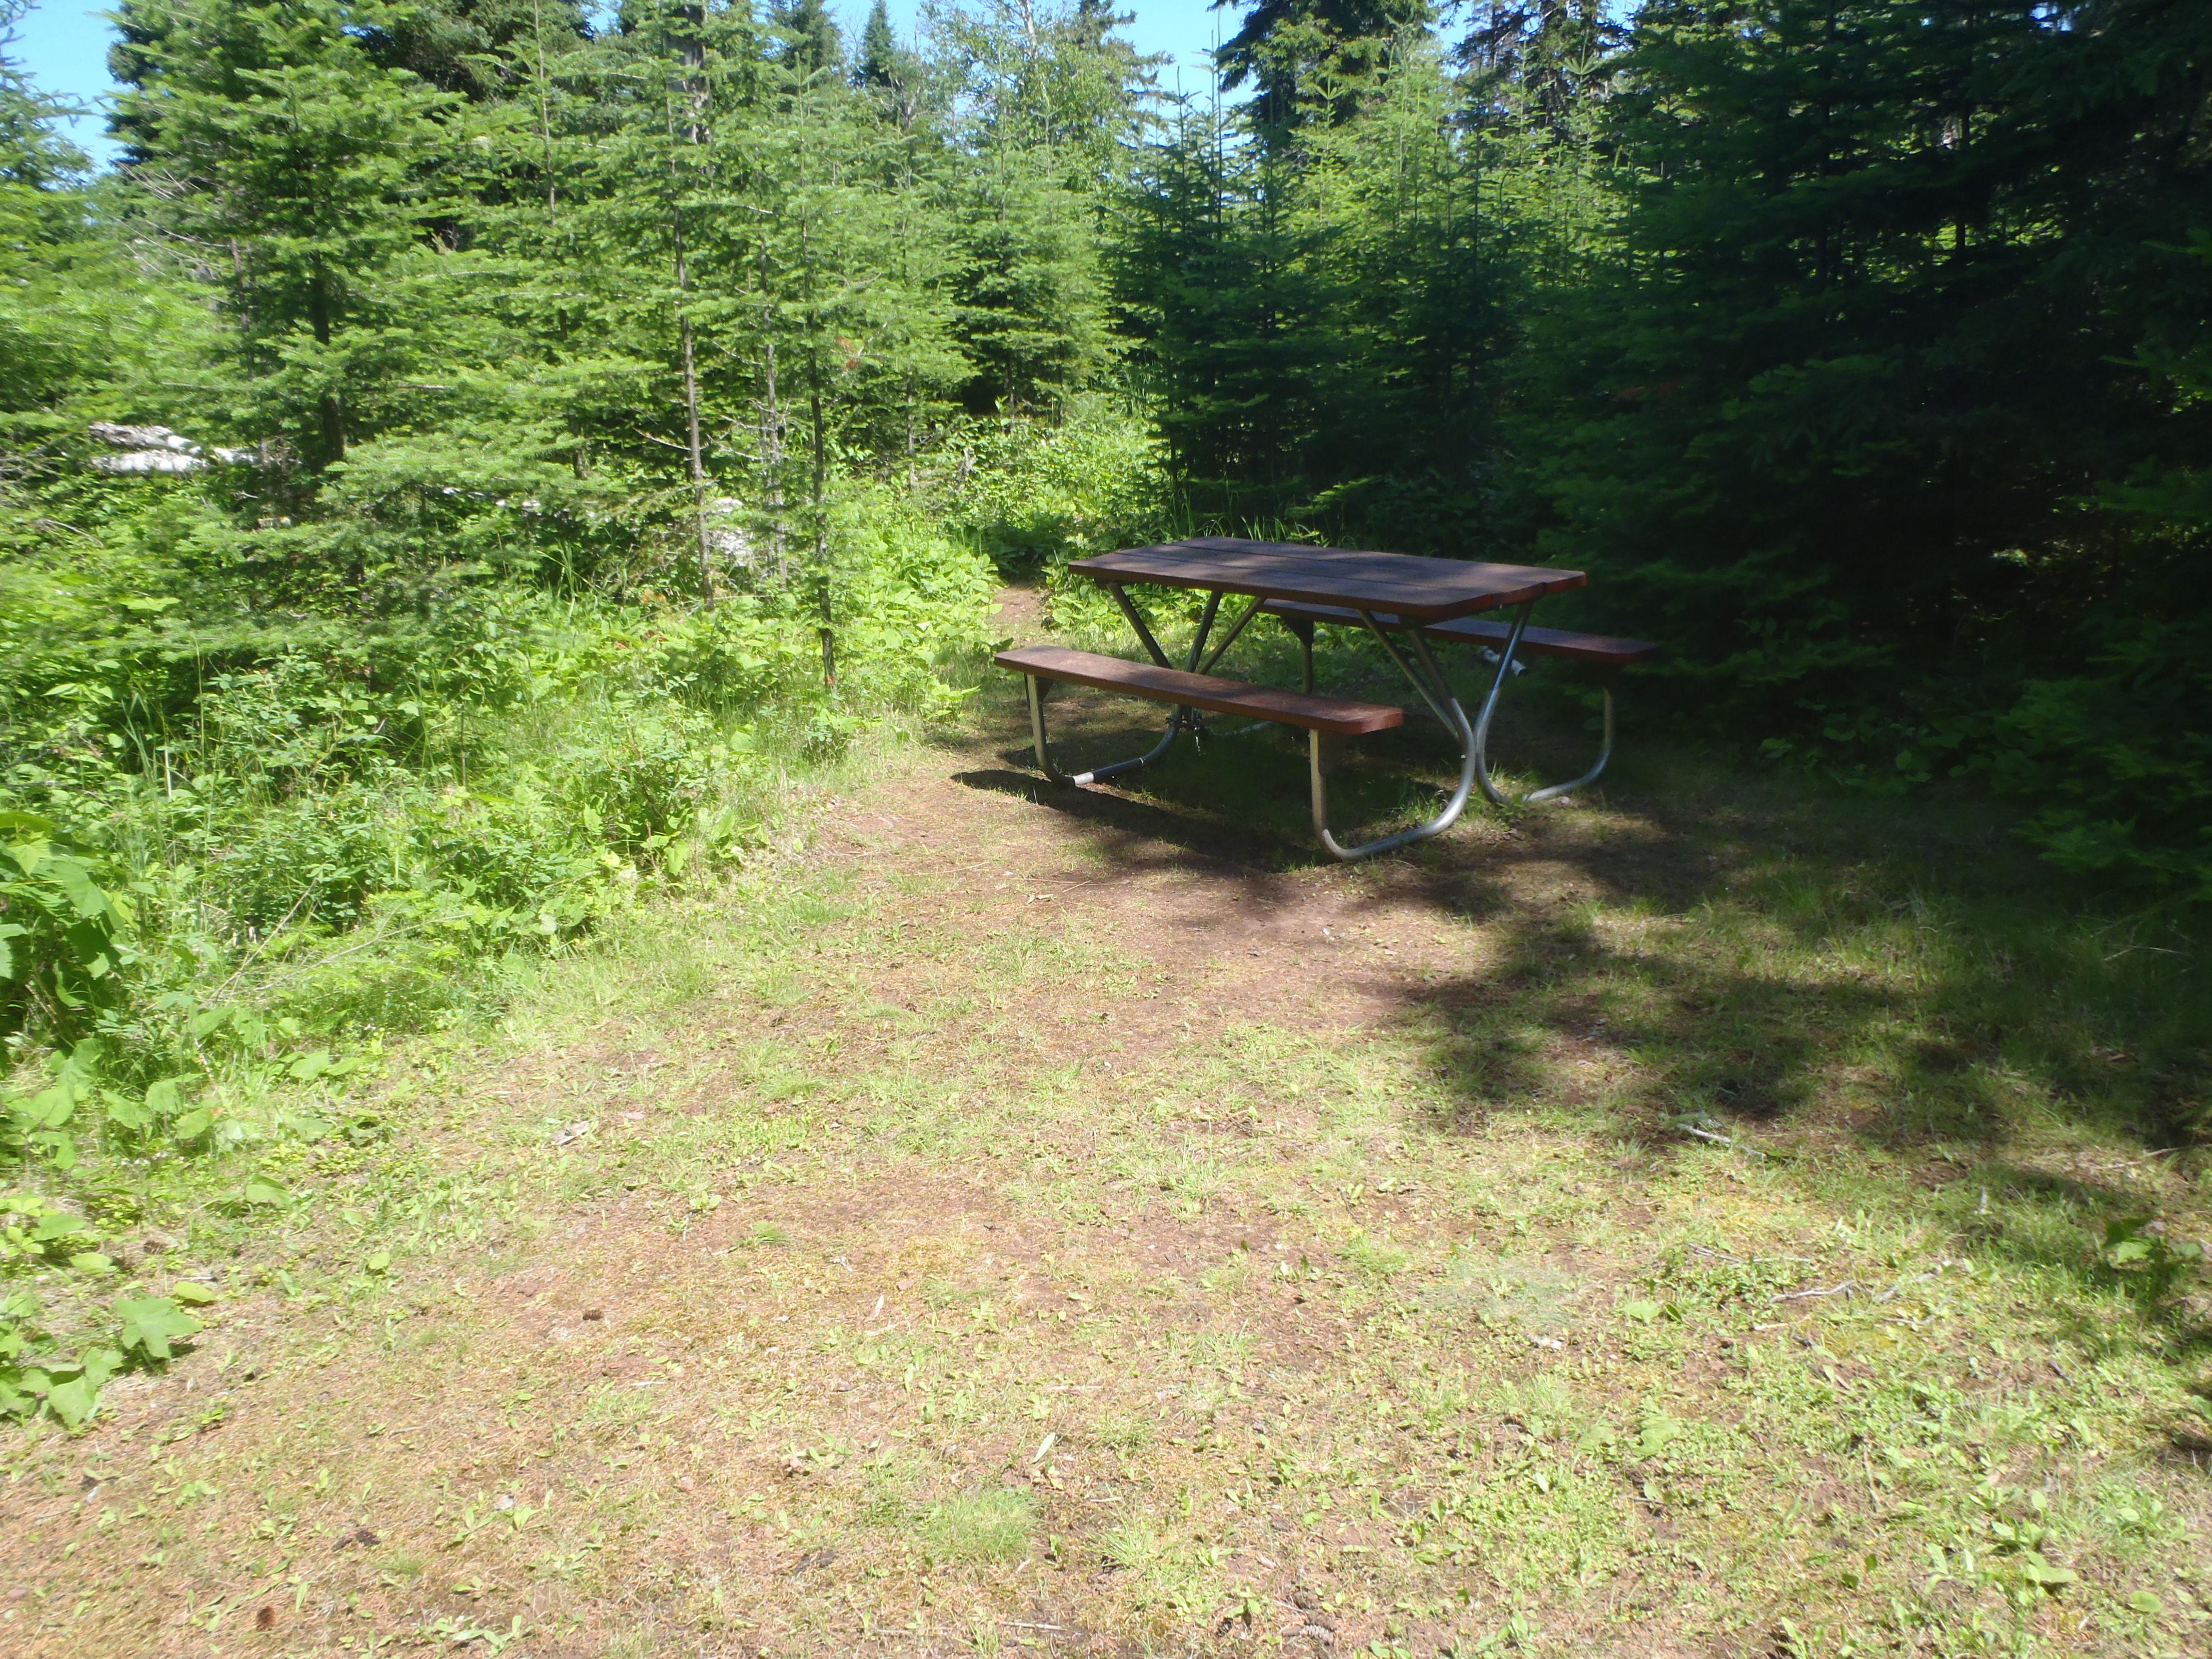 Cleared area with a picnic table surrounded by trees.